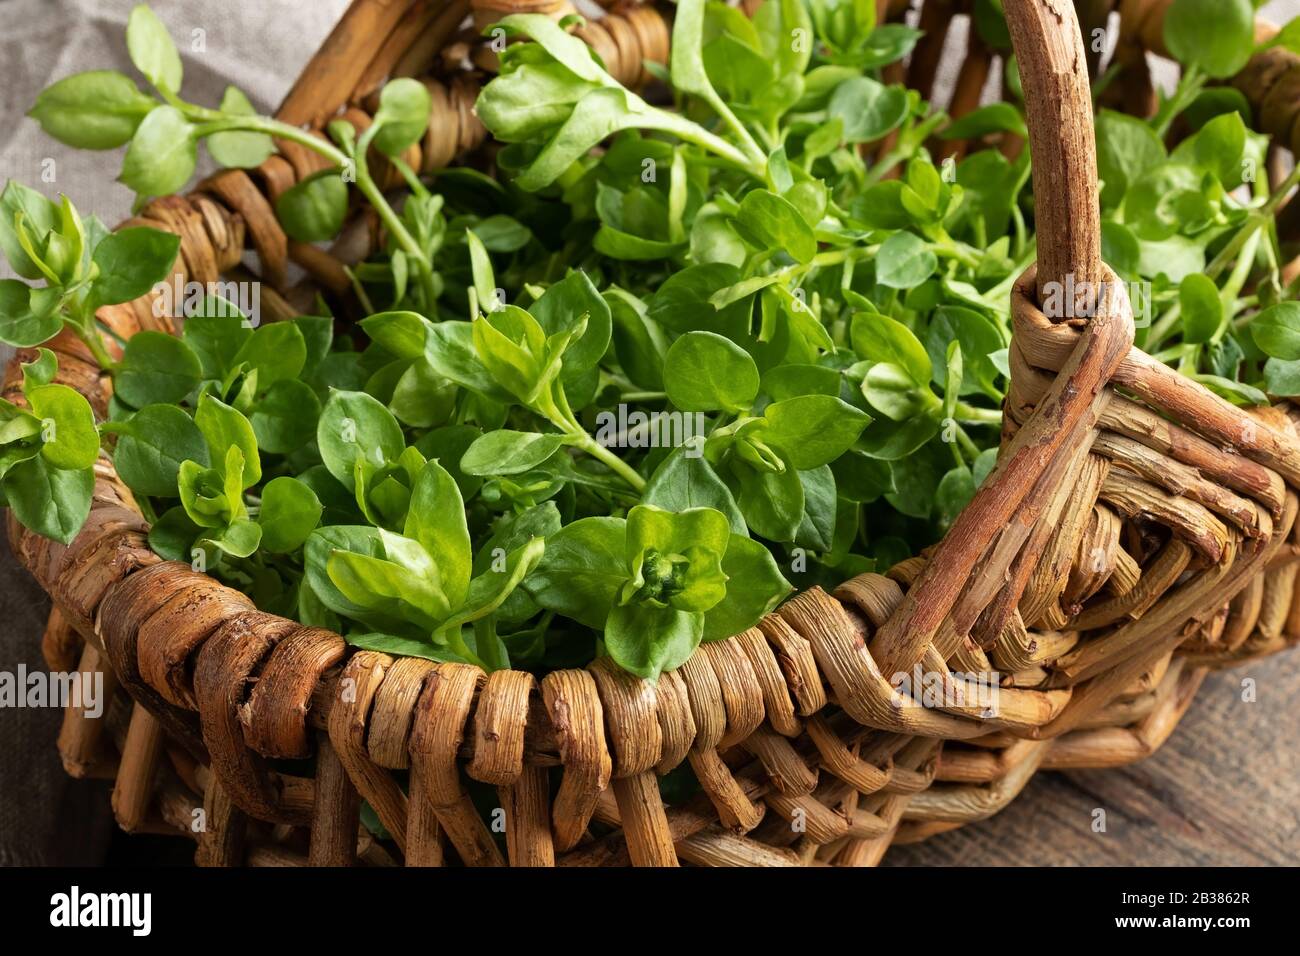 Chickweed or Stellaria media in a basket - a wild edible plant collected in early spring Stock Photo